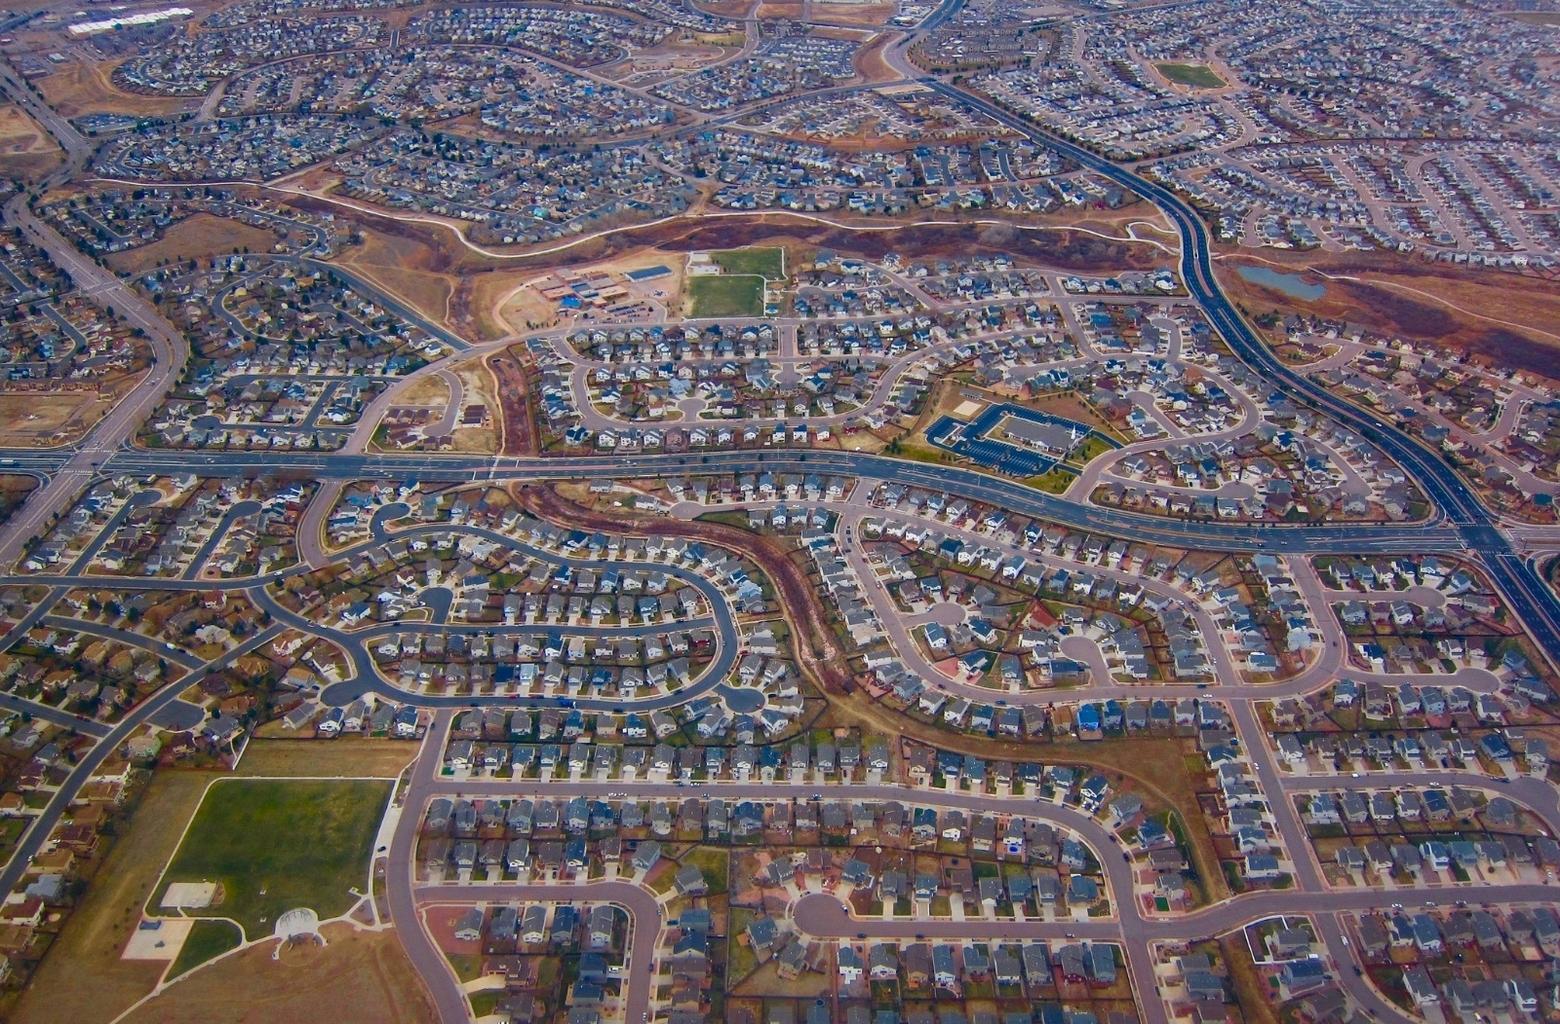 The exploding suburbs of Colorado Springs, Colorado: not a lot of green space or wild wildlife passing through.  Photo courtesy Chris Waits/Creative Commons (https://www.flickr.com/photos/chriswaits/7285246358)